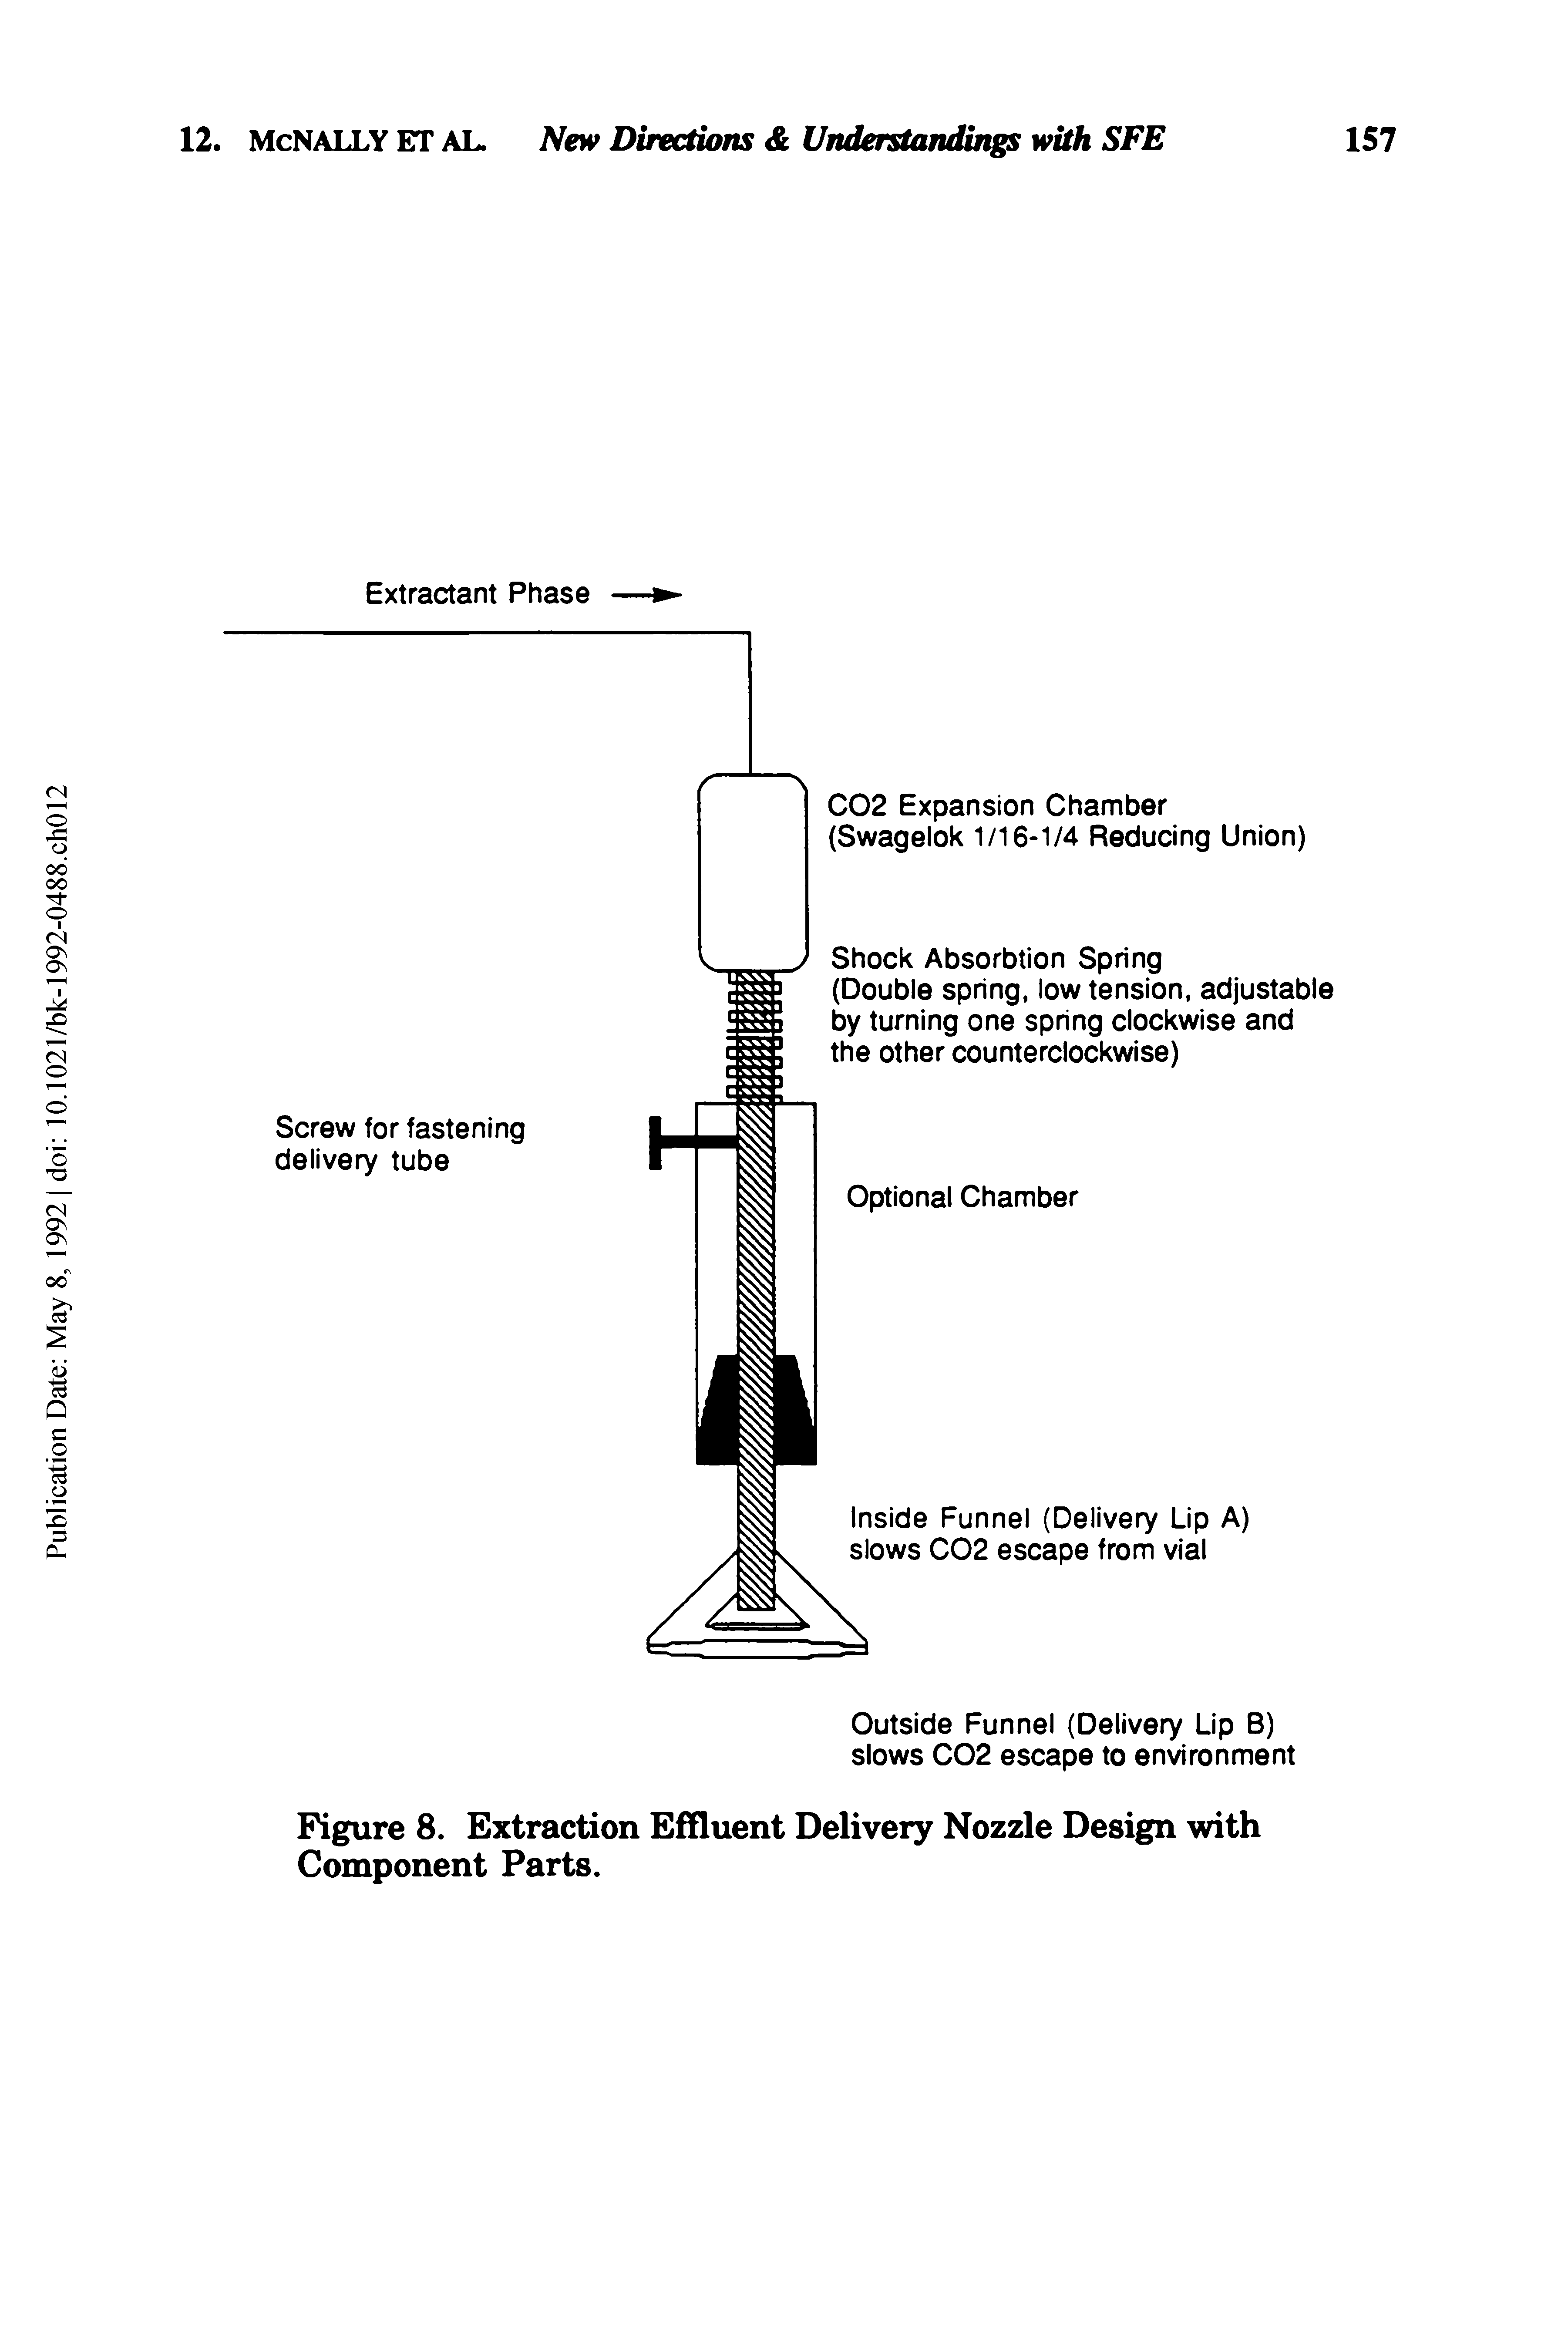 Figure 8. Extraction Effluent Delivery Nozzle Design with Component Parts.